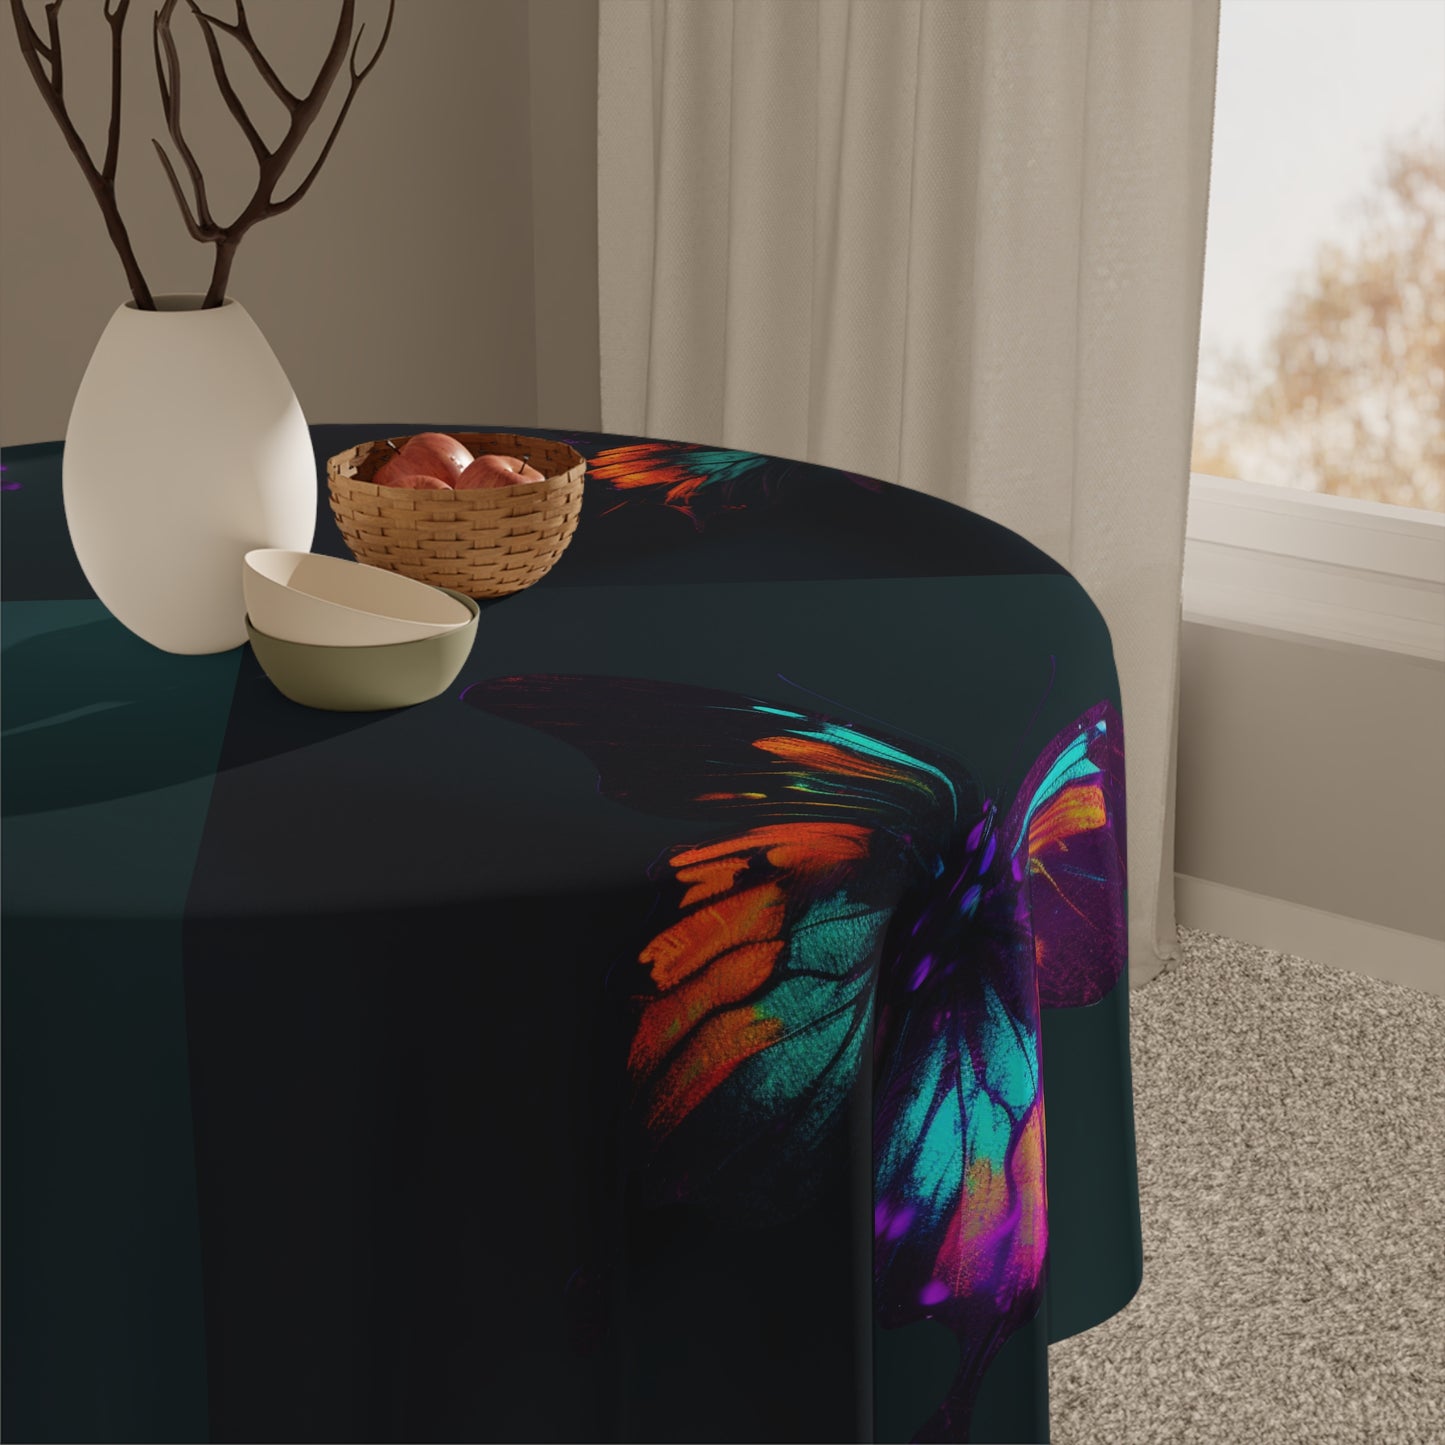 Tablecloth Hyper Colorful Butterfly Purple 5